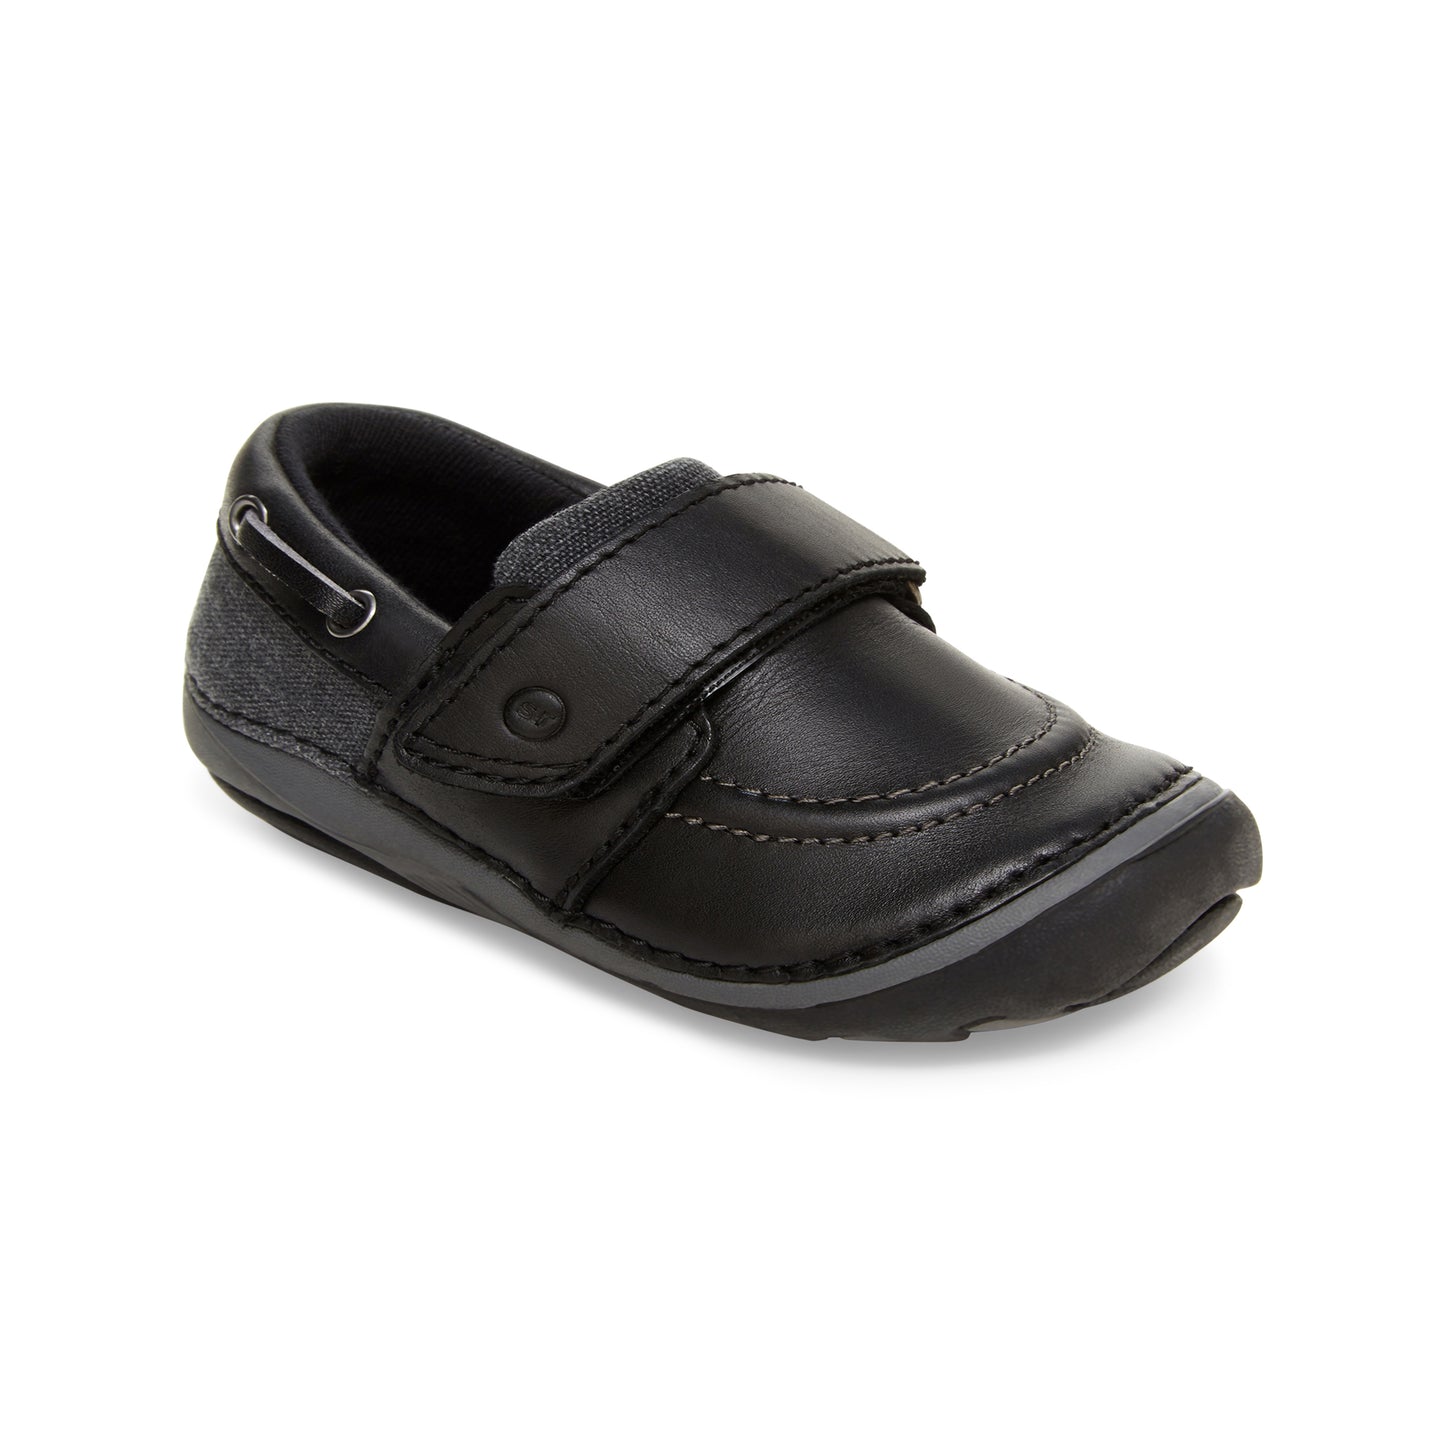 Wally Loafer Black